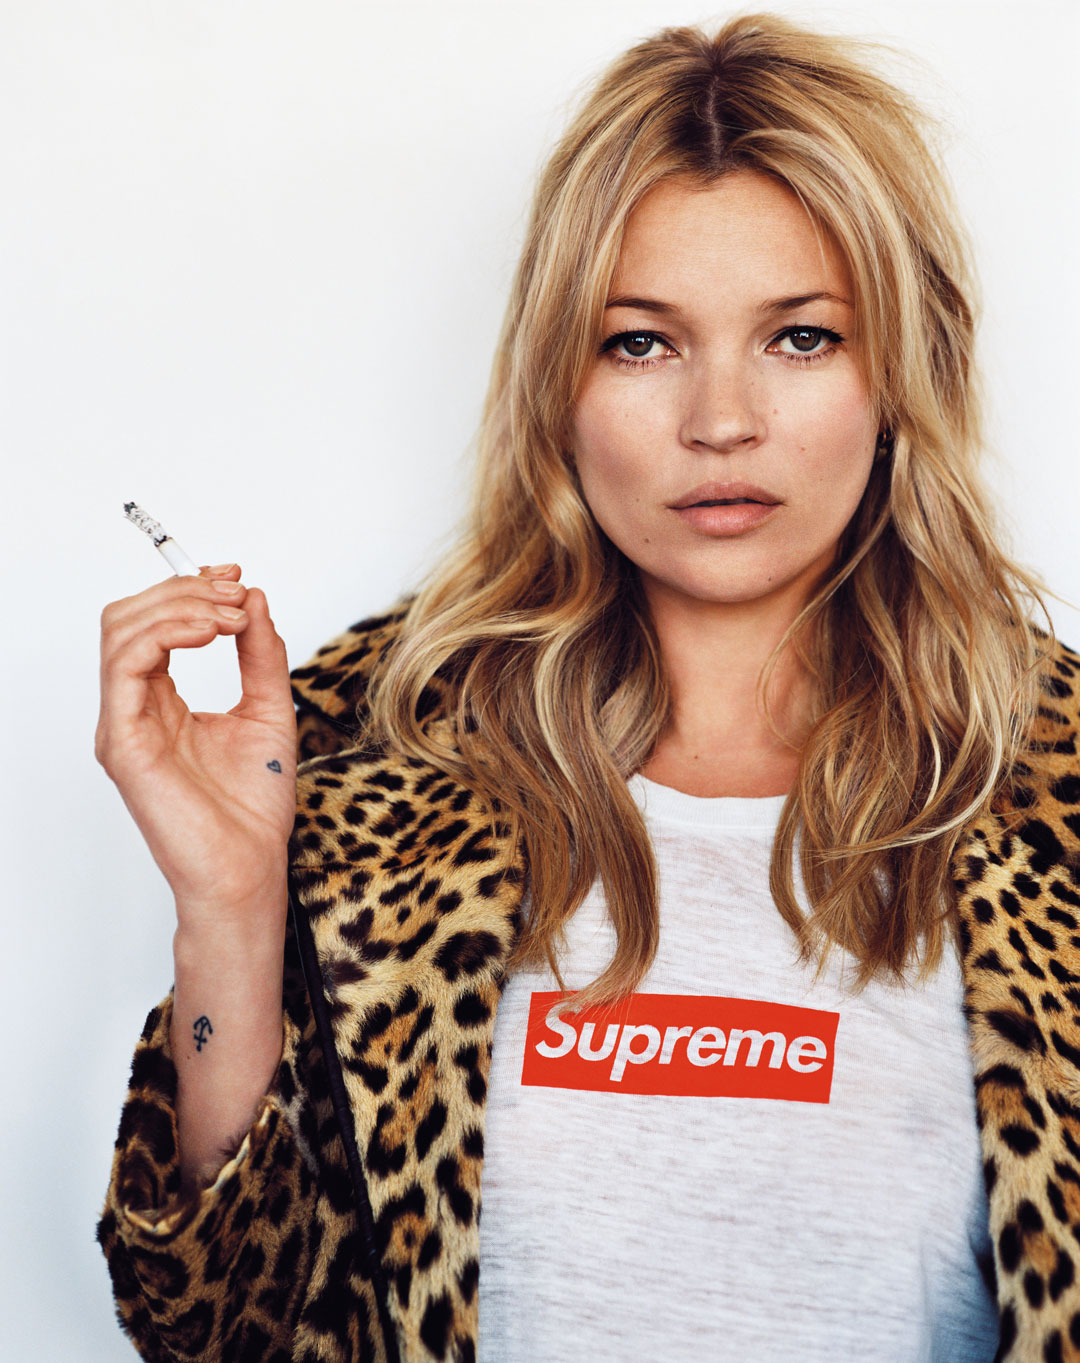 Kate Moss by Alasdair McLellan, London, 2012, as reproduced in our Supreme book